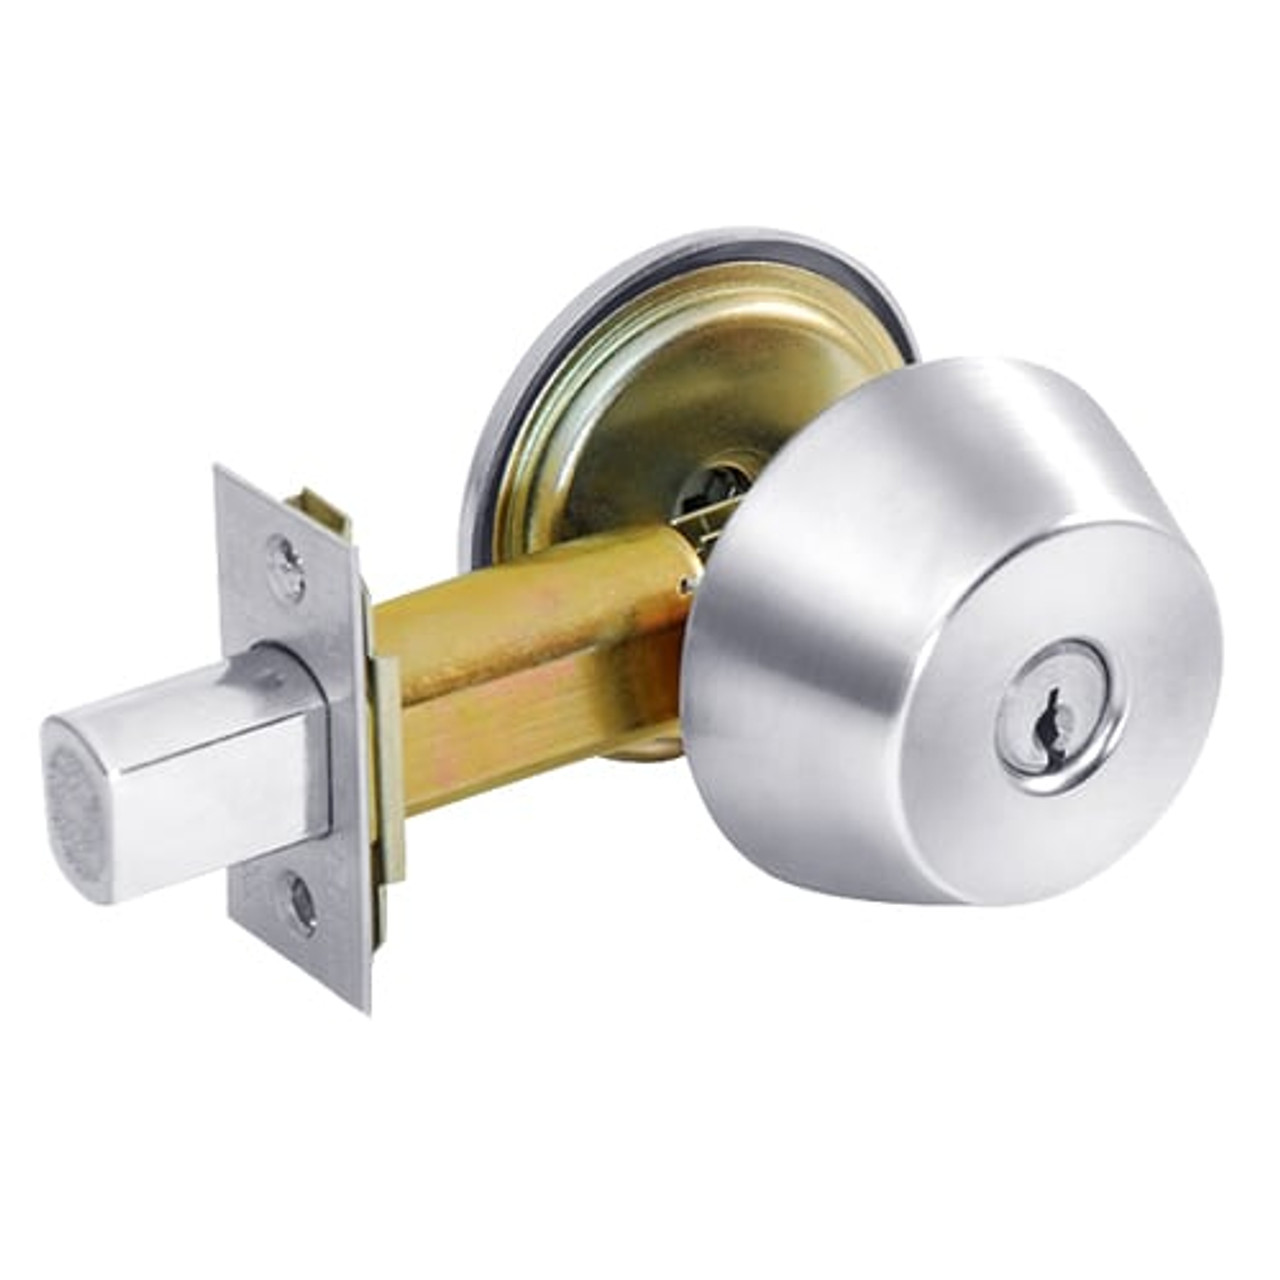 DL3211-625 Corbin DL3200 Series Cylindrical Deadlocks with Single Cylinder w/ Blank Plate in Bright Chrome Finish